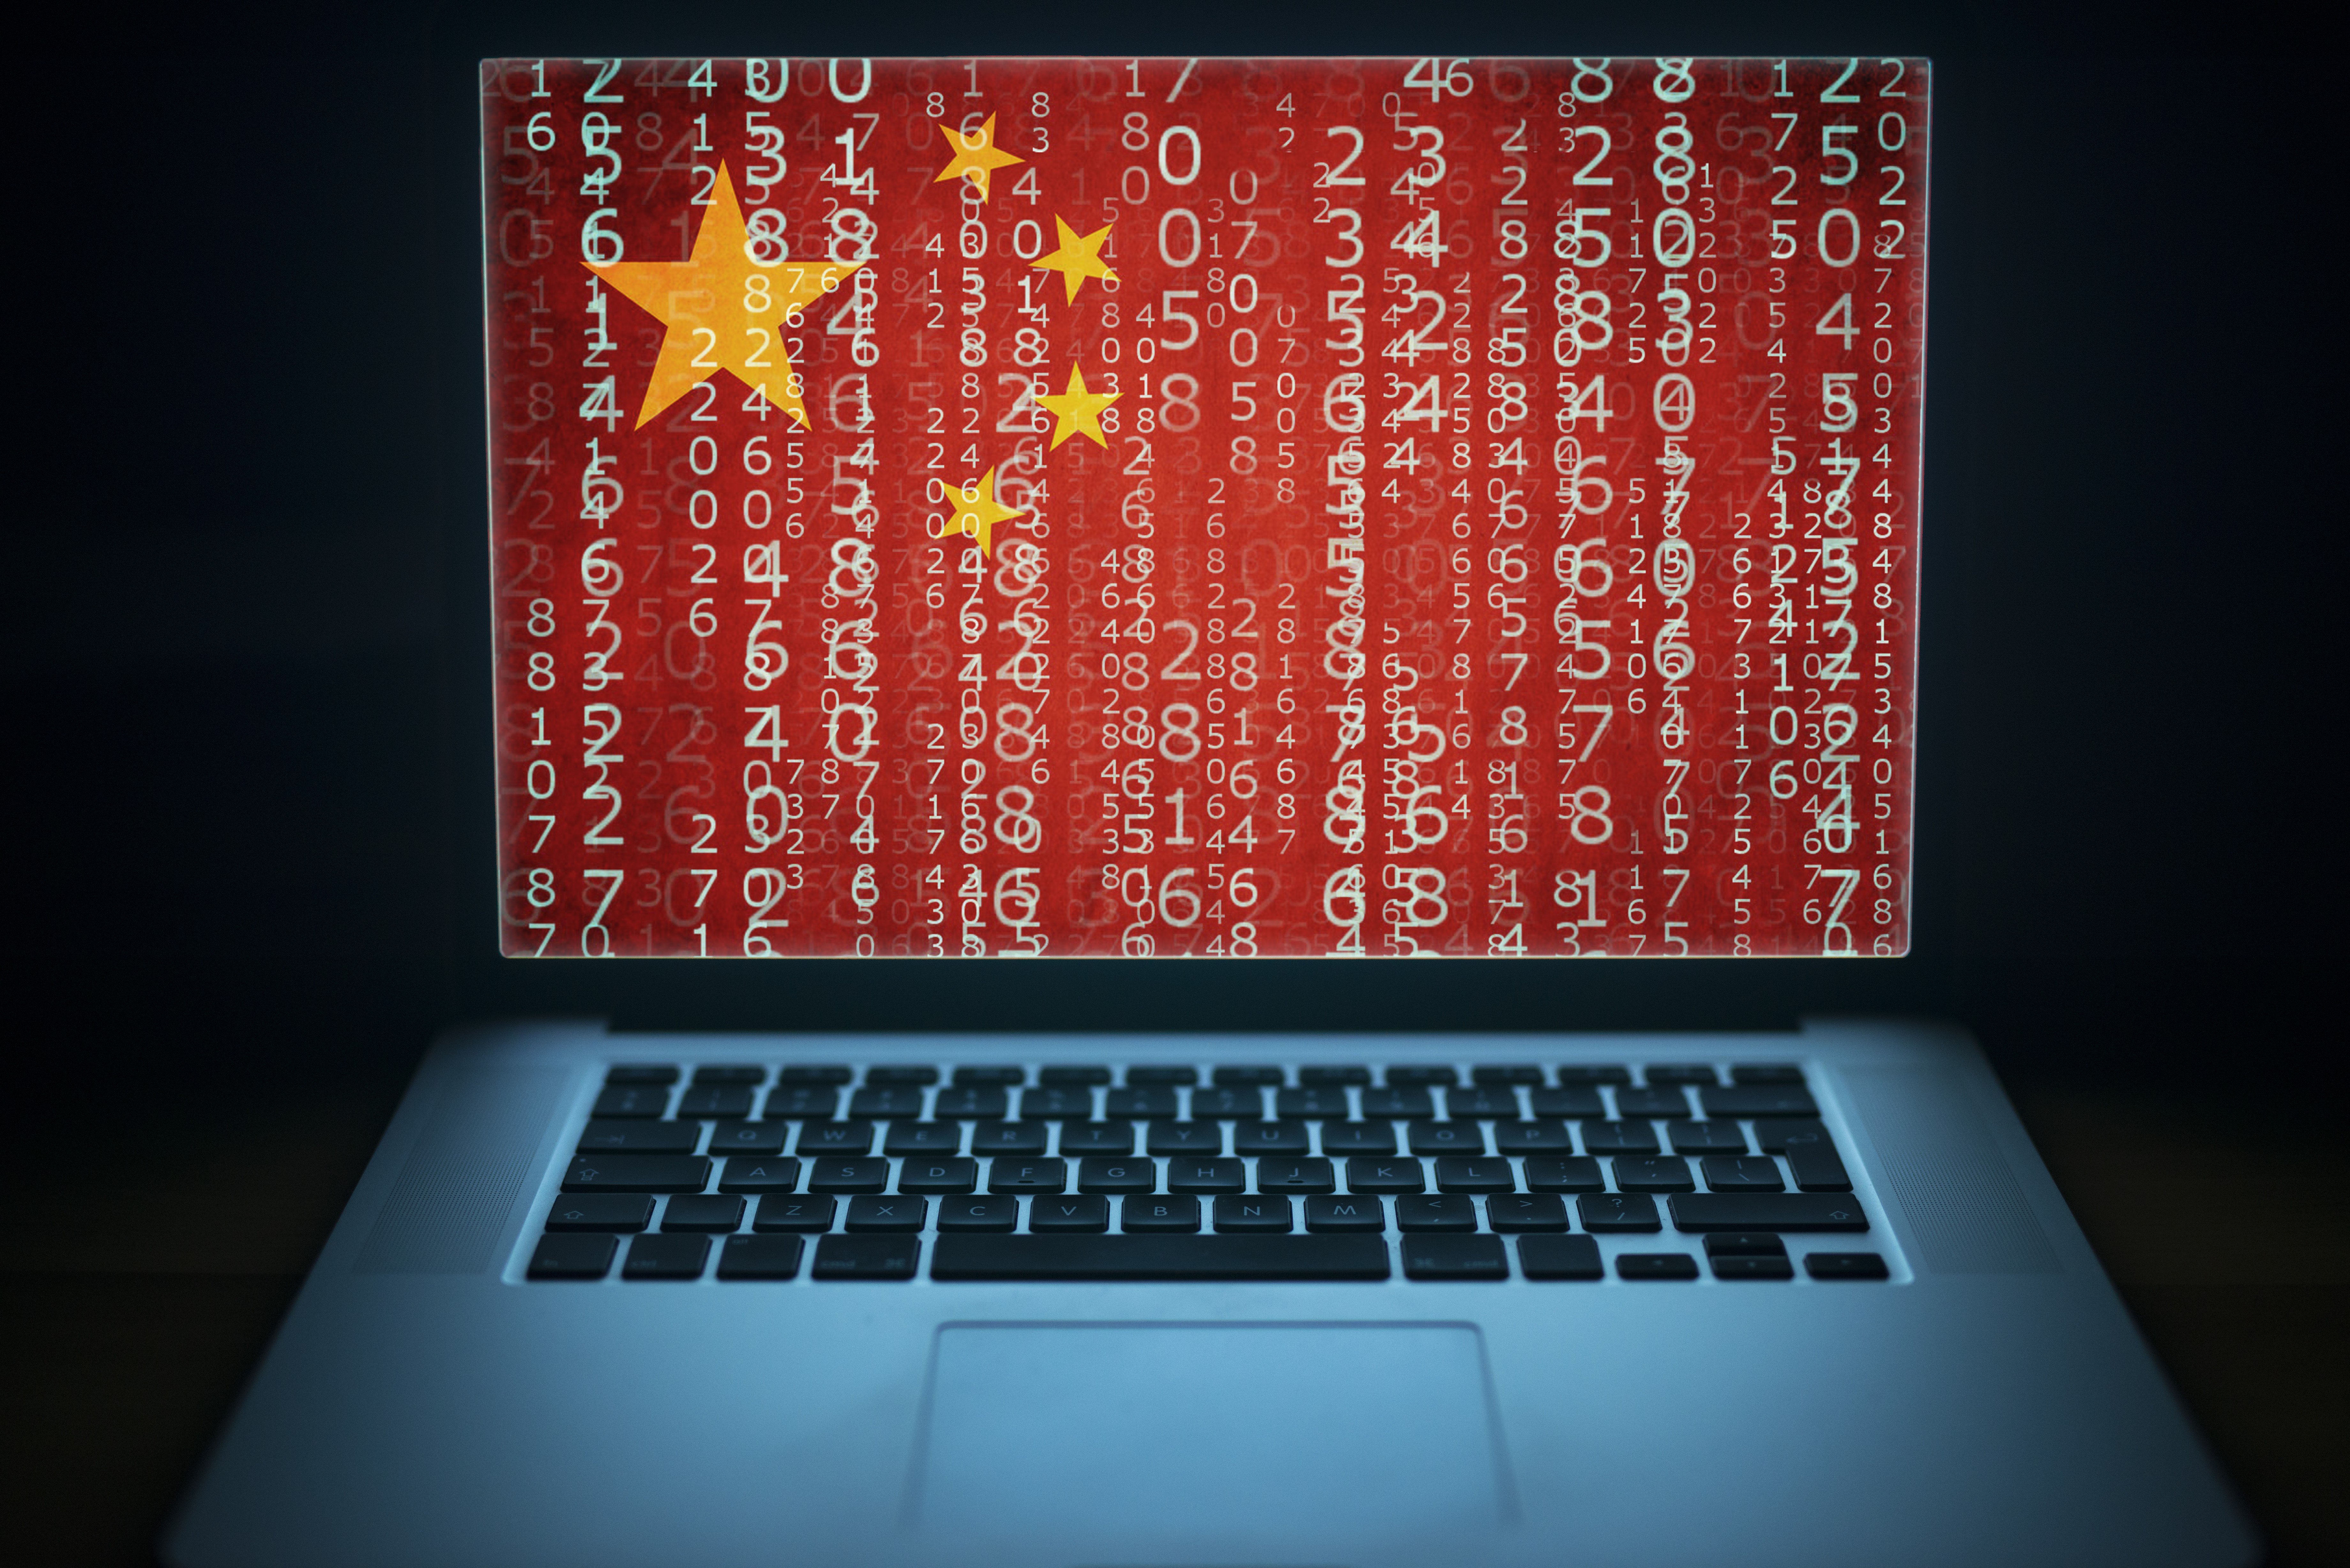 Rongbin Han argues that the Chinese government recognises it cannot possibly control all of the internet, so instead it engages in a ‘porous censorship’ that targets the most sensitive content. Photo: Shutterstock